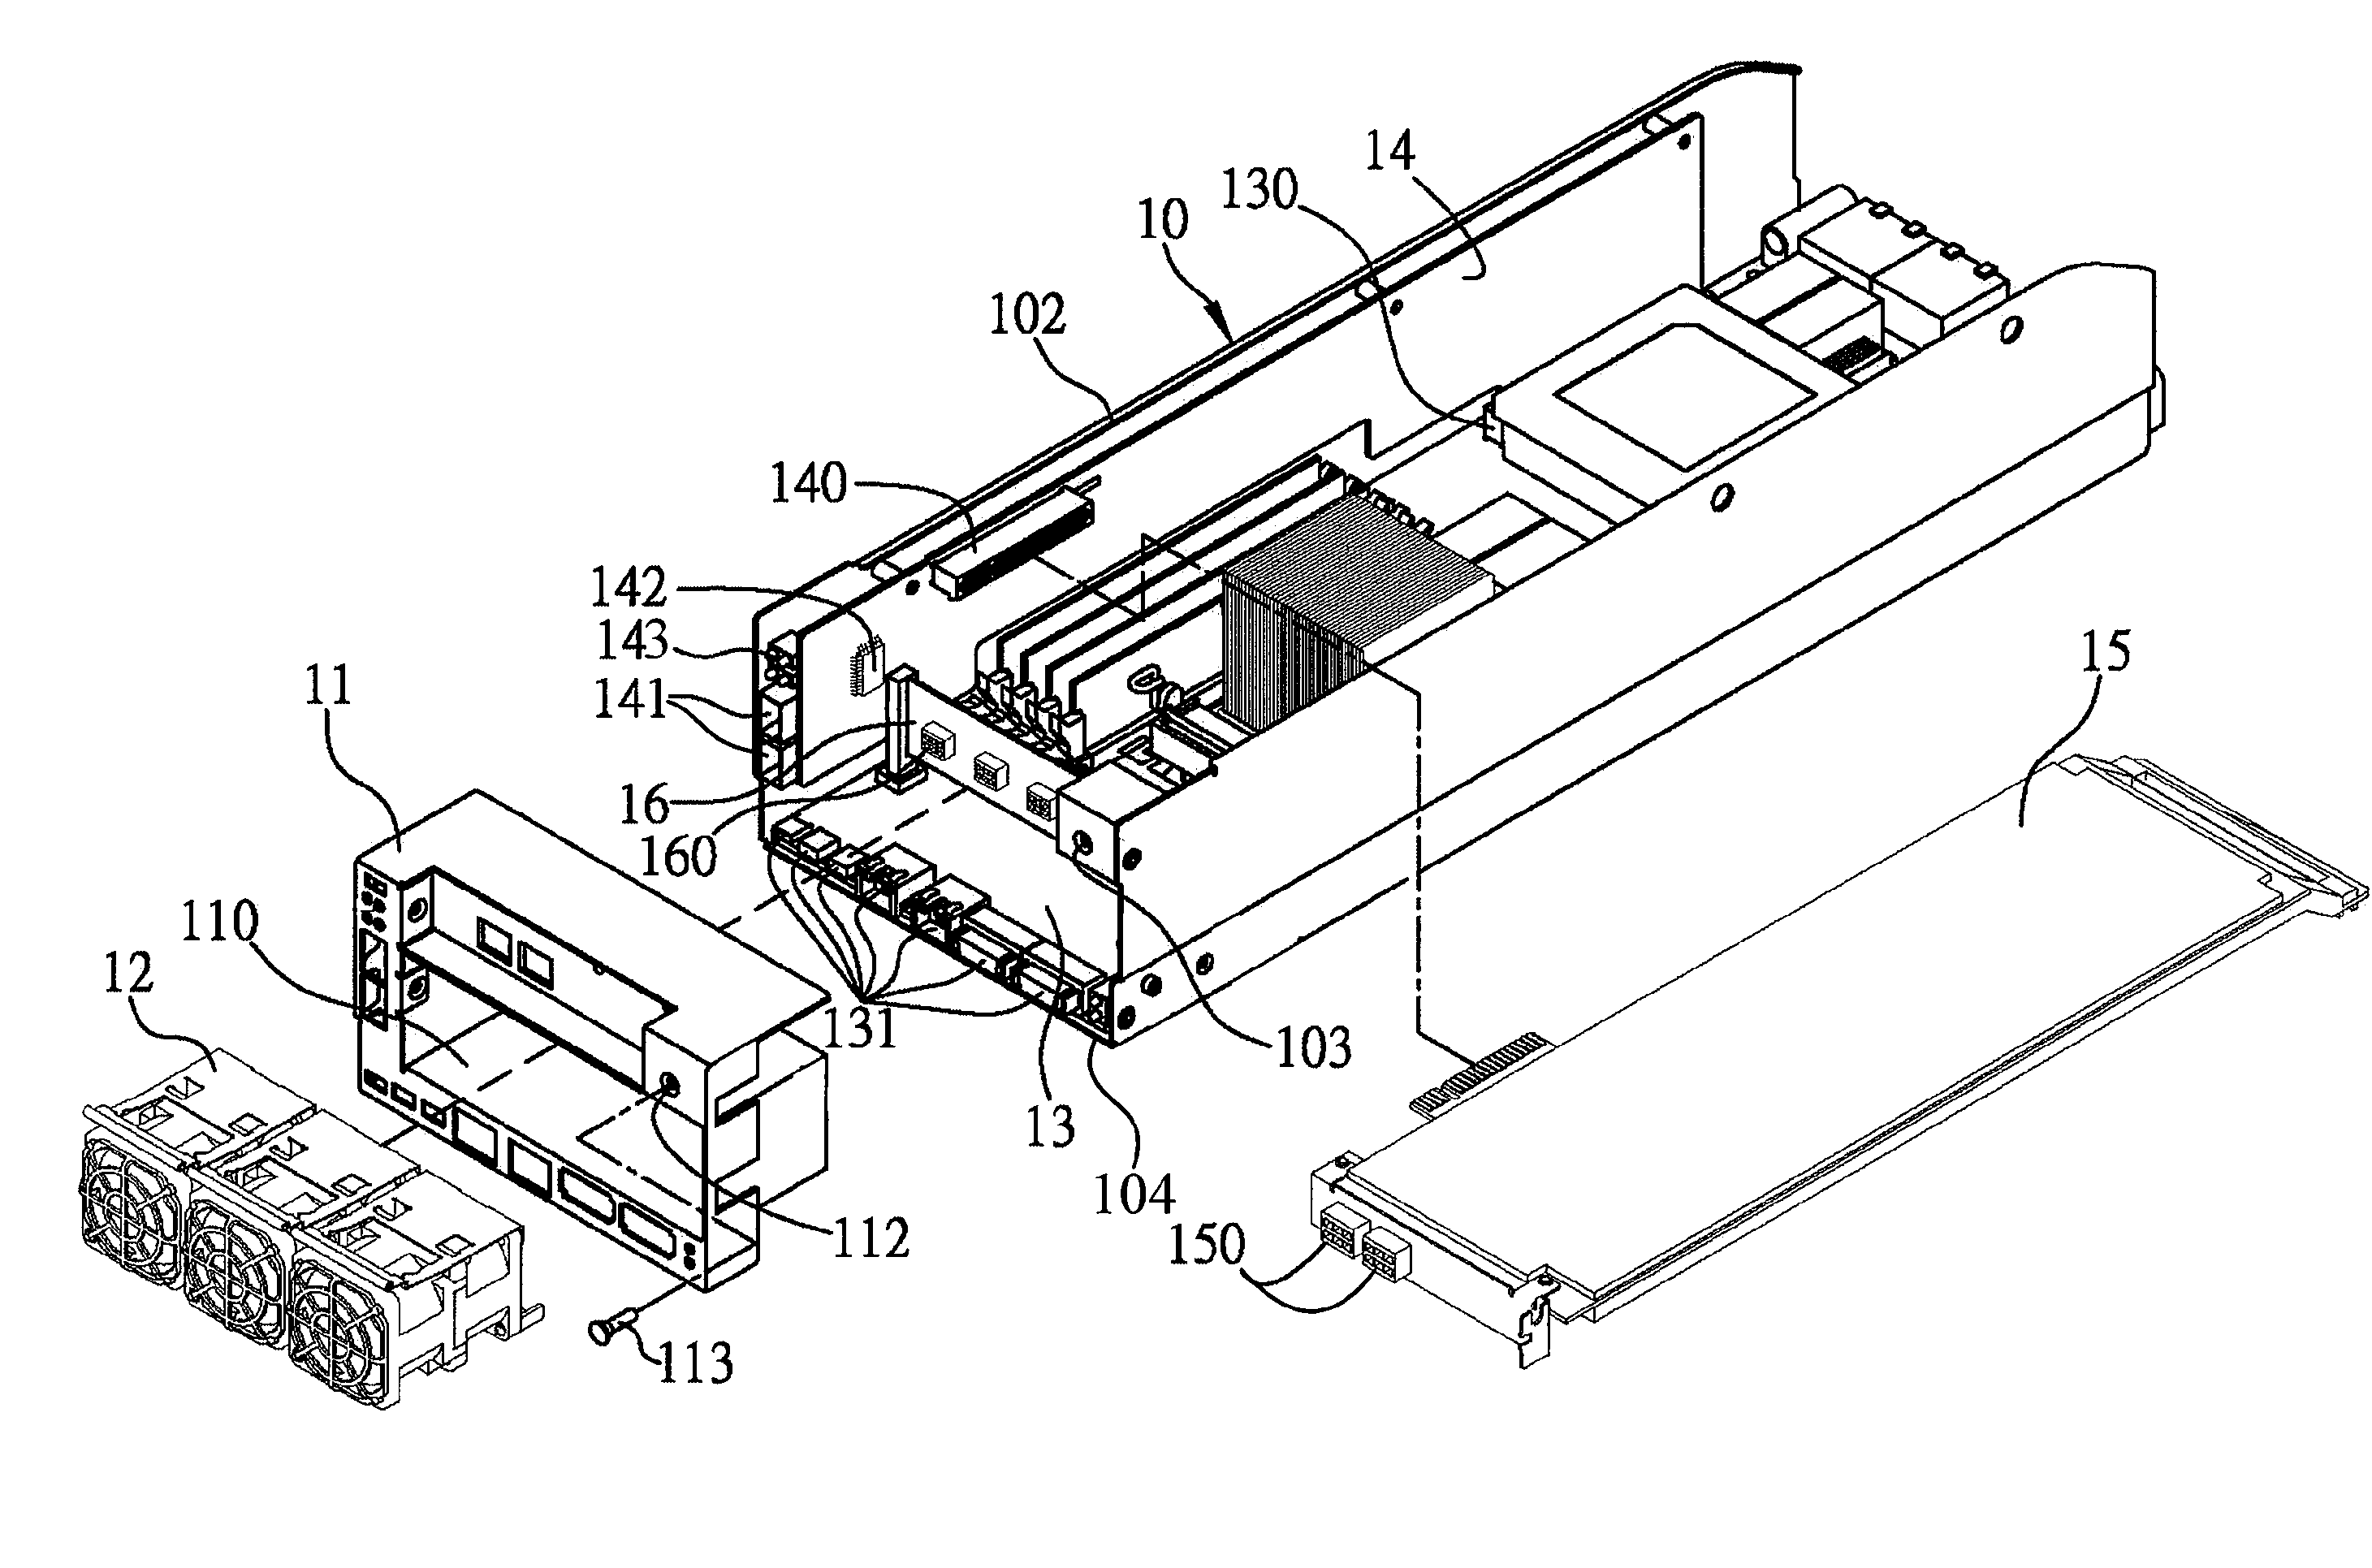 Physical Configuration of Computer System